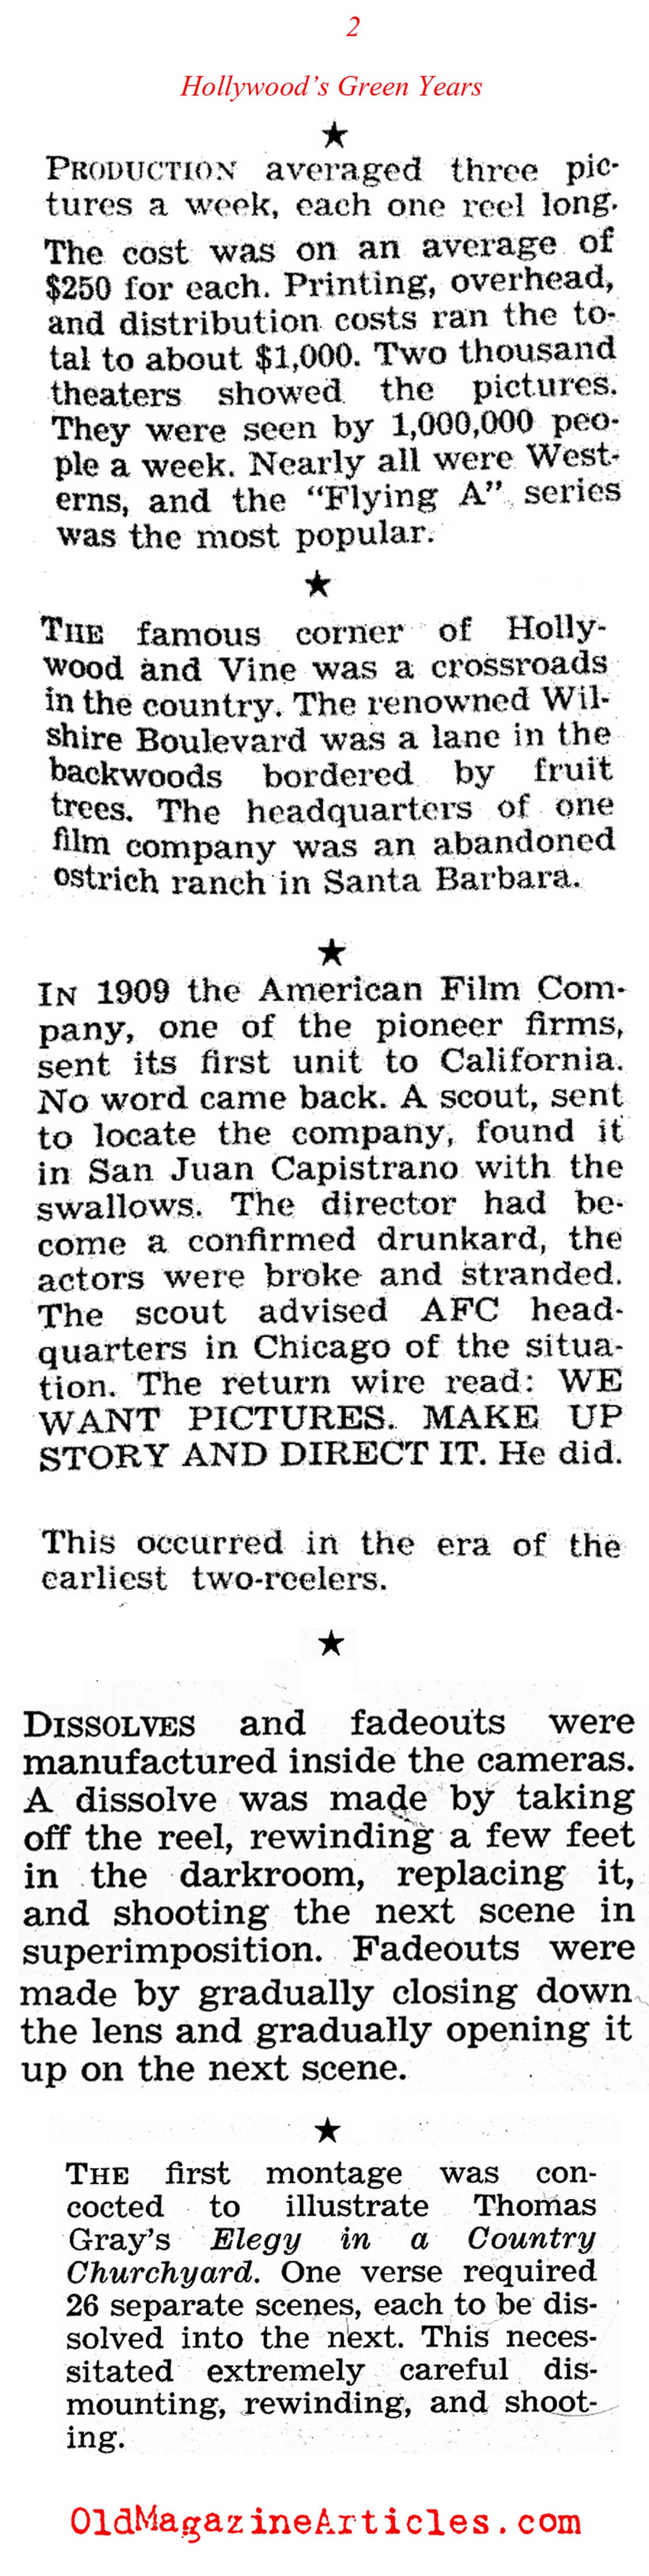 Fast Facts About Hollywood Silent Movies ('47 Magazine, 1947)